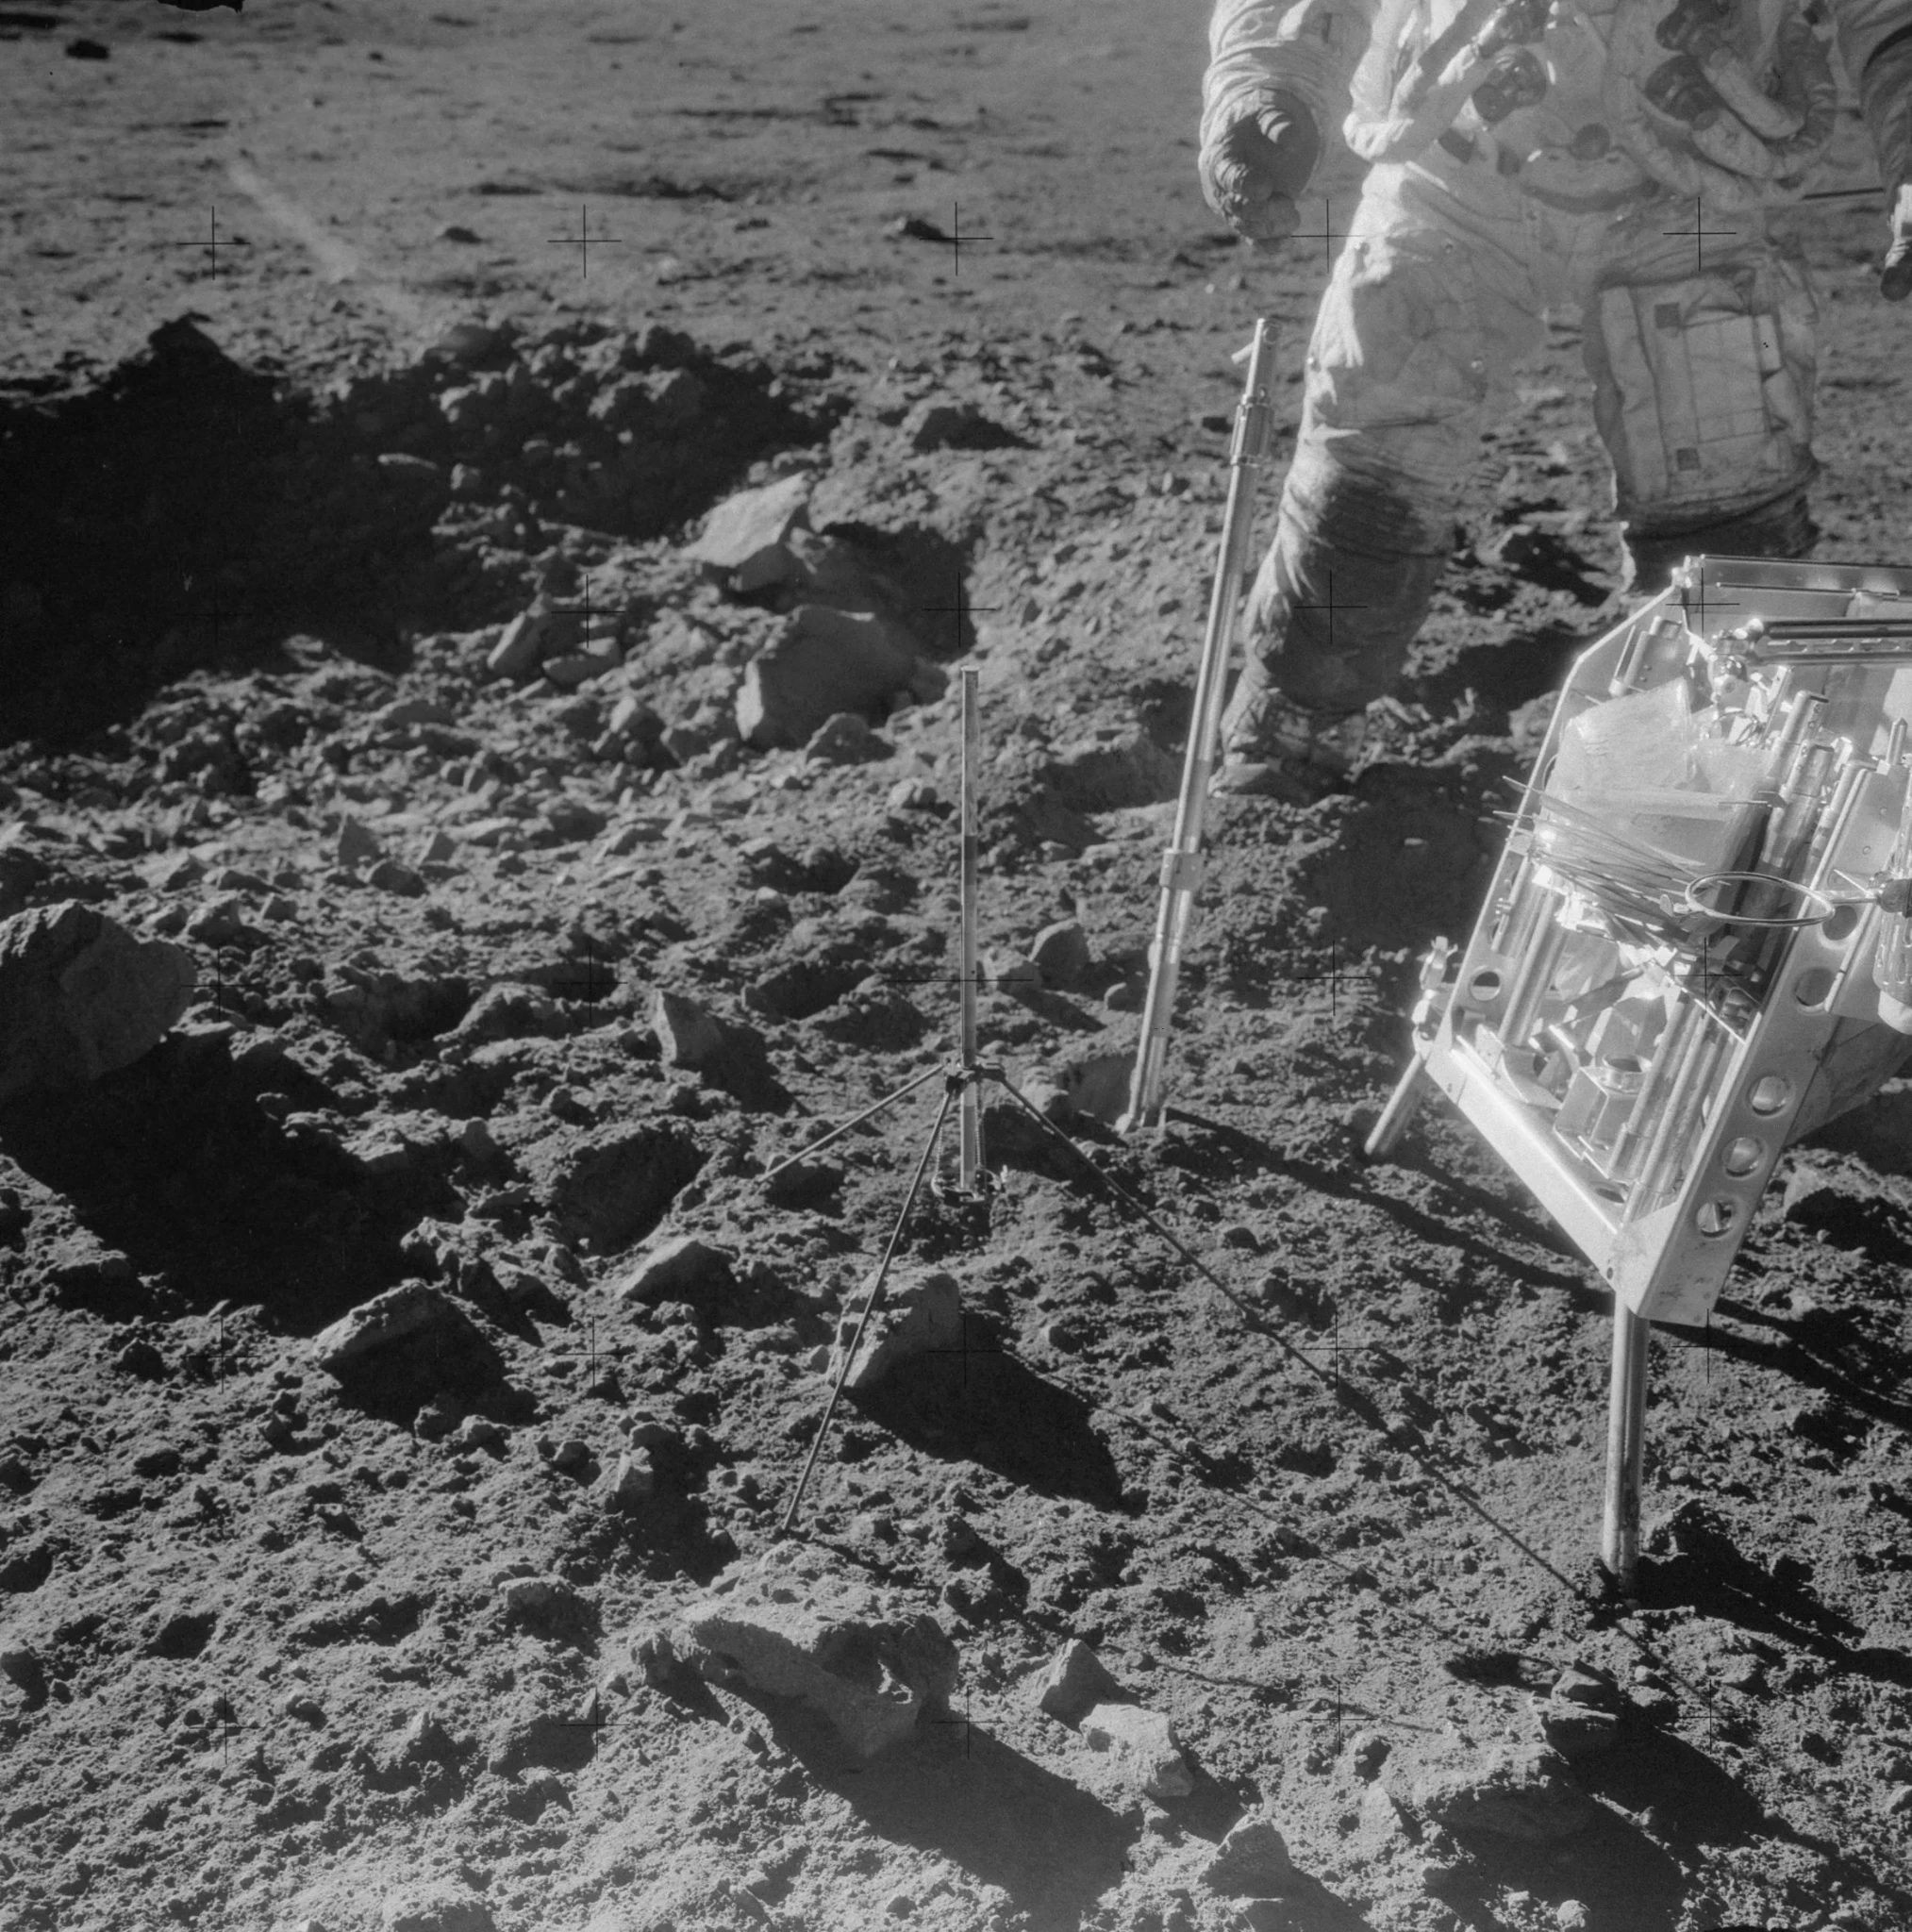 An astronaut stands on lunar soil to the right of frame, tending to surface experiments filled with tubing and wires. The boots of their spacesuit are deeply blackened from a coating of lunar dust. https://www.nasa.gov/history/alsj/picture.html